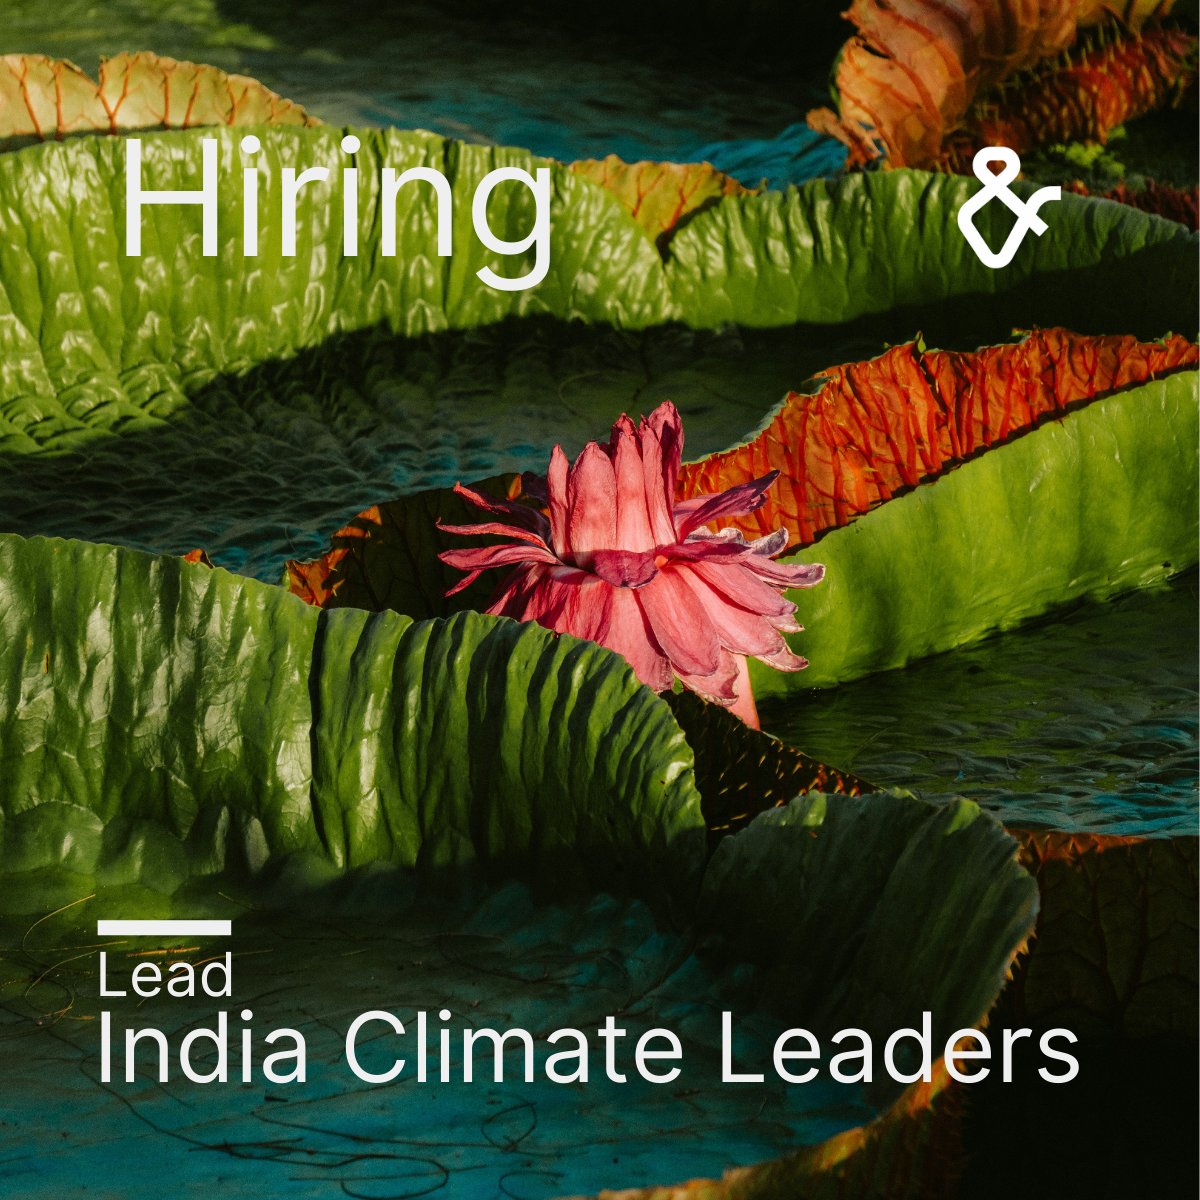 #JobOpportunity: We are hiring a Lead - India Climate Leaders who will play a crucial role in engaging with philanthropists and business leaders to cultivate India's pioneering climate leaders. Discover more about this opportunity here: tinyurl.com/y9jvk9rf #ClimateJobs